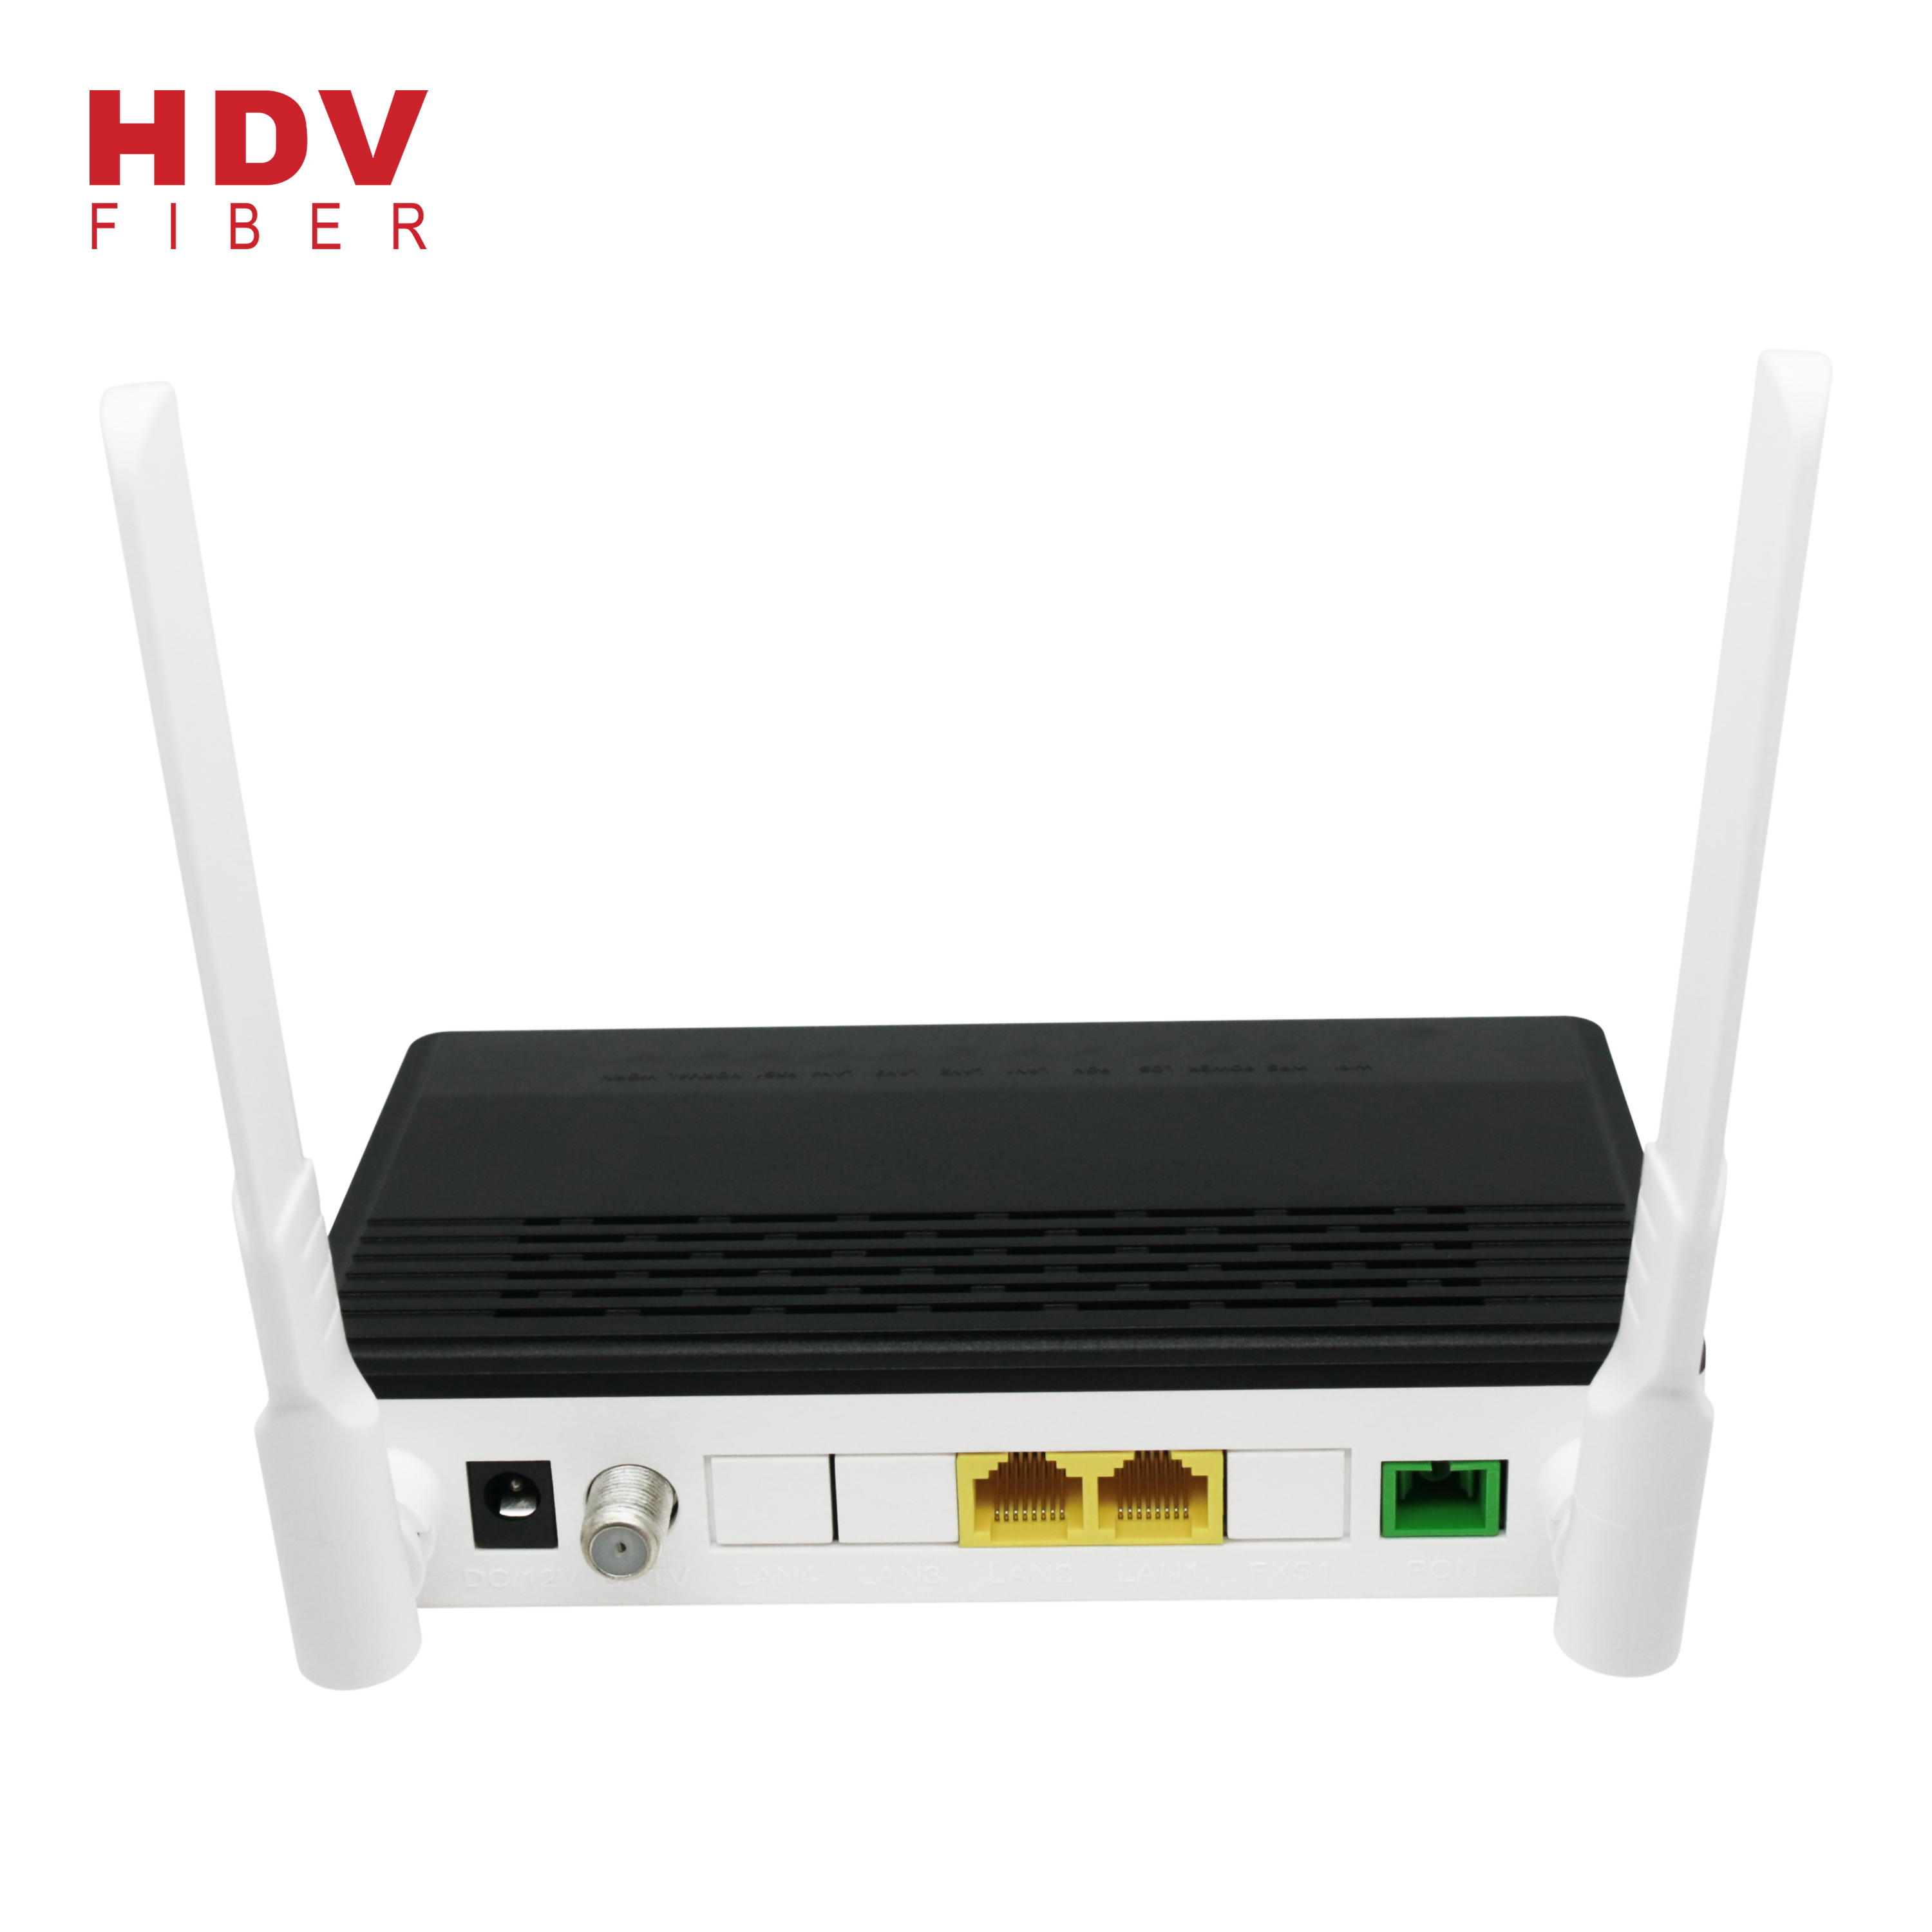 XPON Both Gpon and Epon ONU 1GE 1FE WIFI CATV with Realtek chipset Featured Image